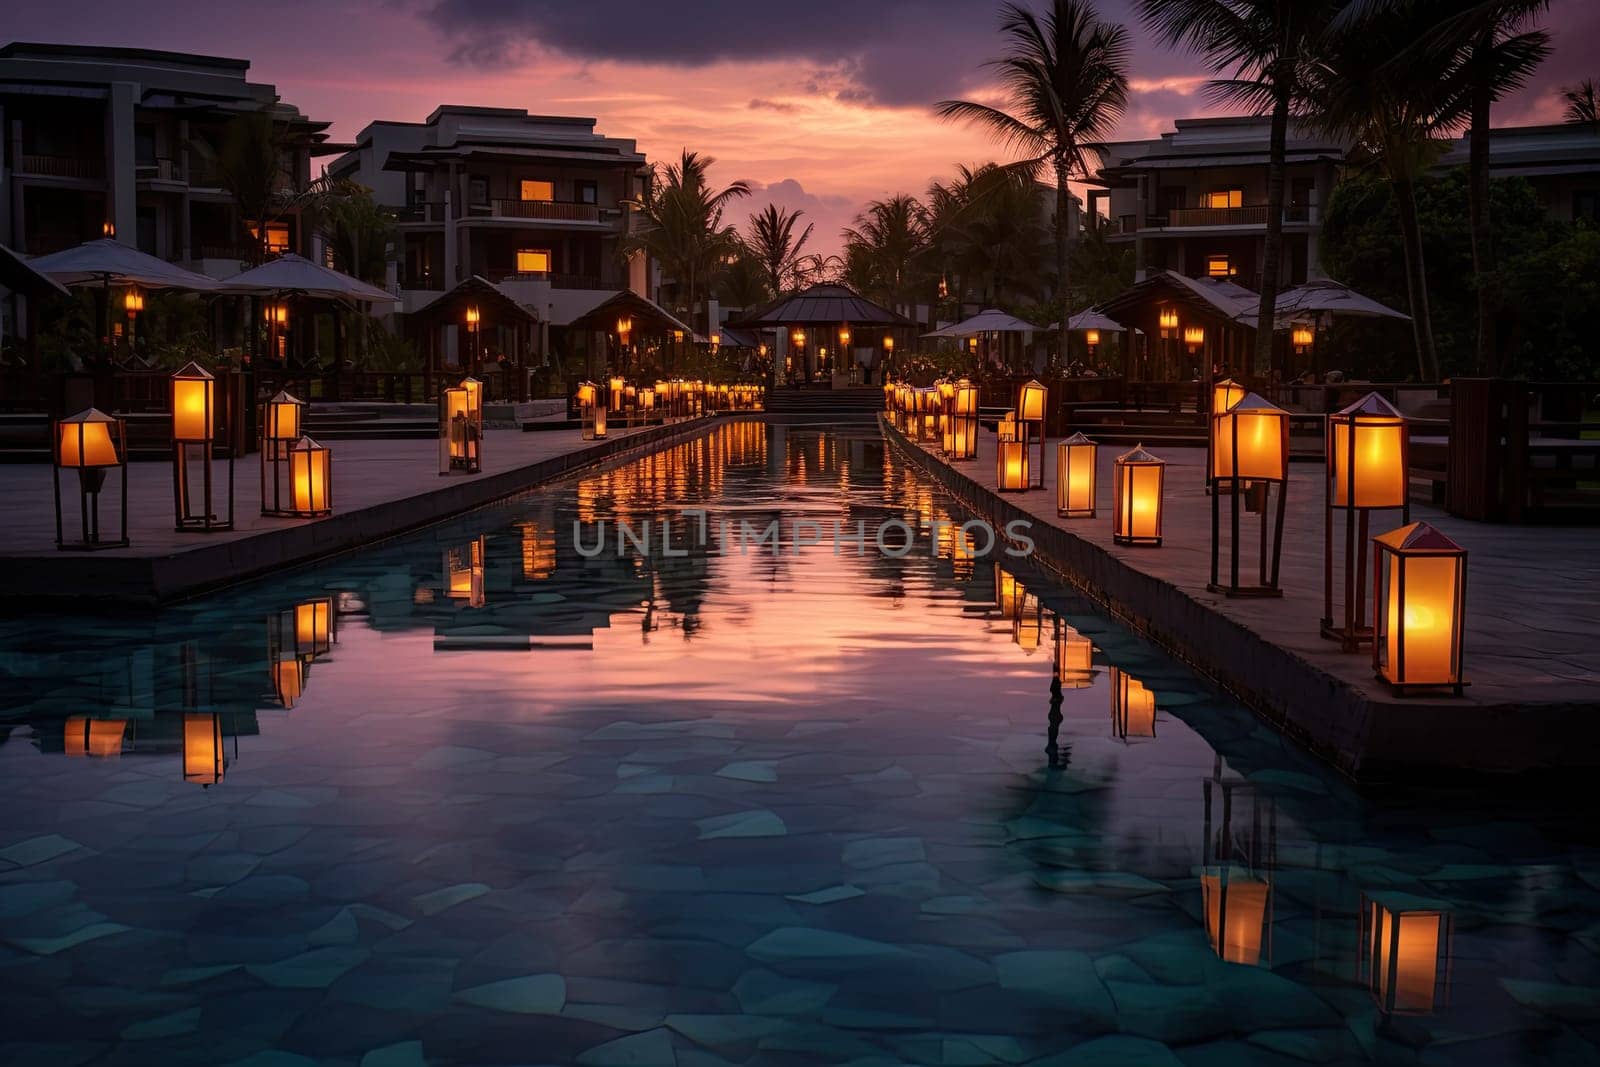 A Serene Nighttime Oasis: A Pool Aglow with the Warm Light of Lanterns